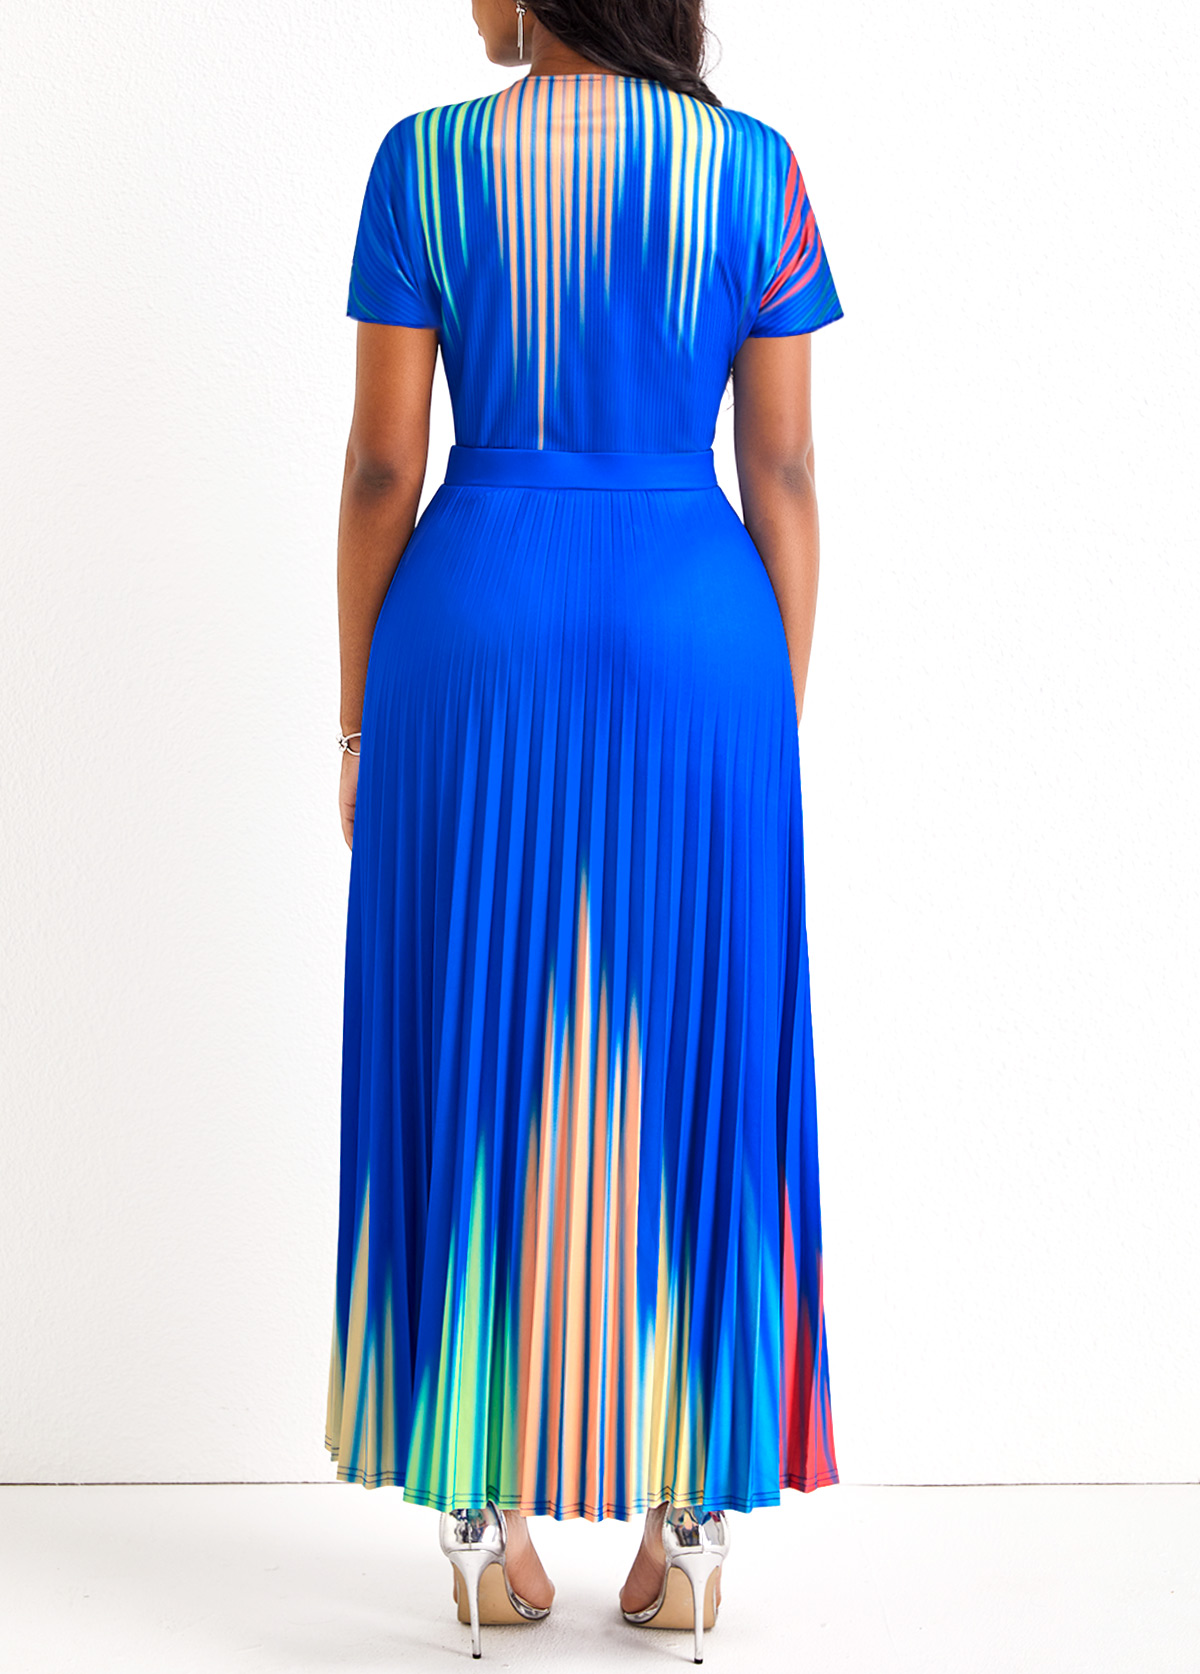 Ombre Pleated Royal Blue Round Neck Maxi Dress